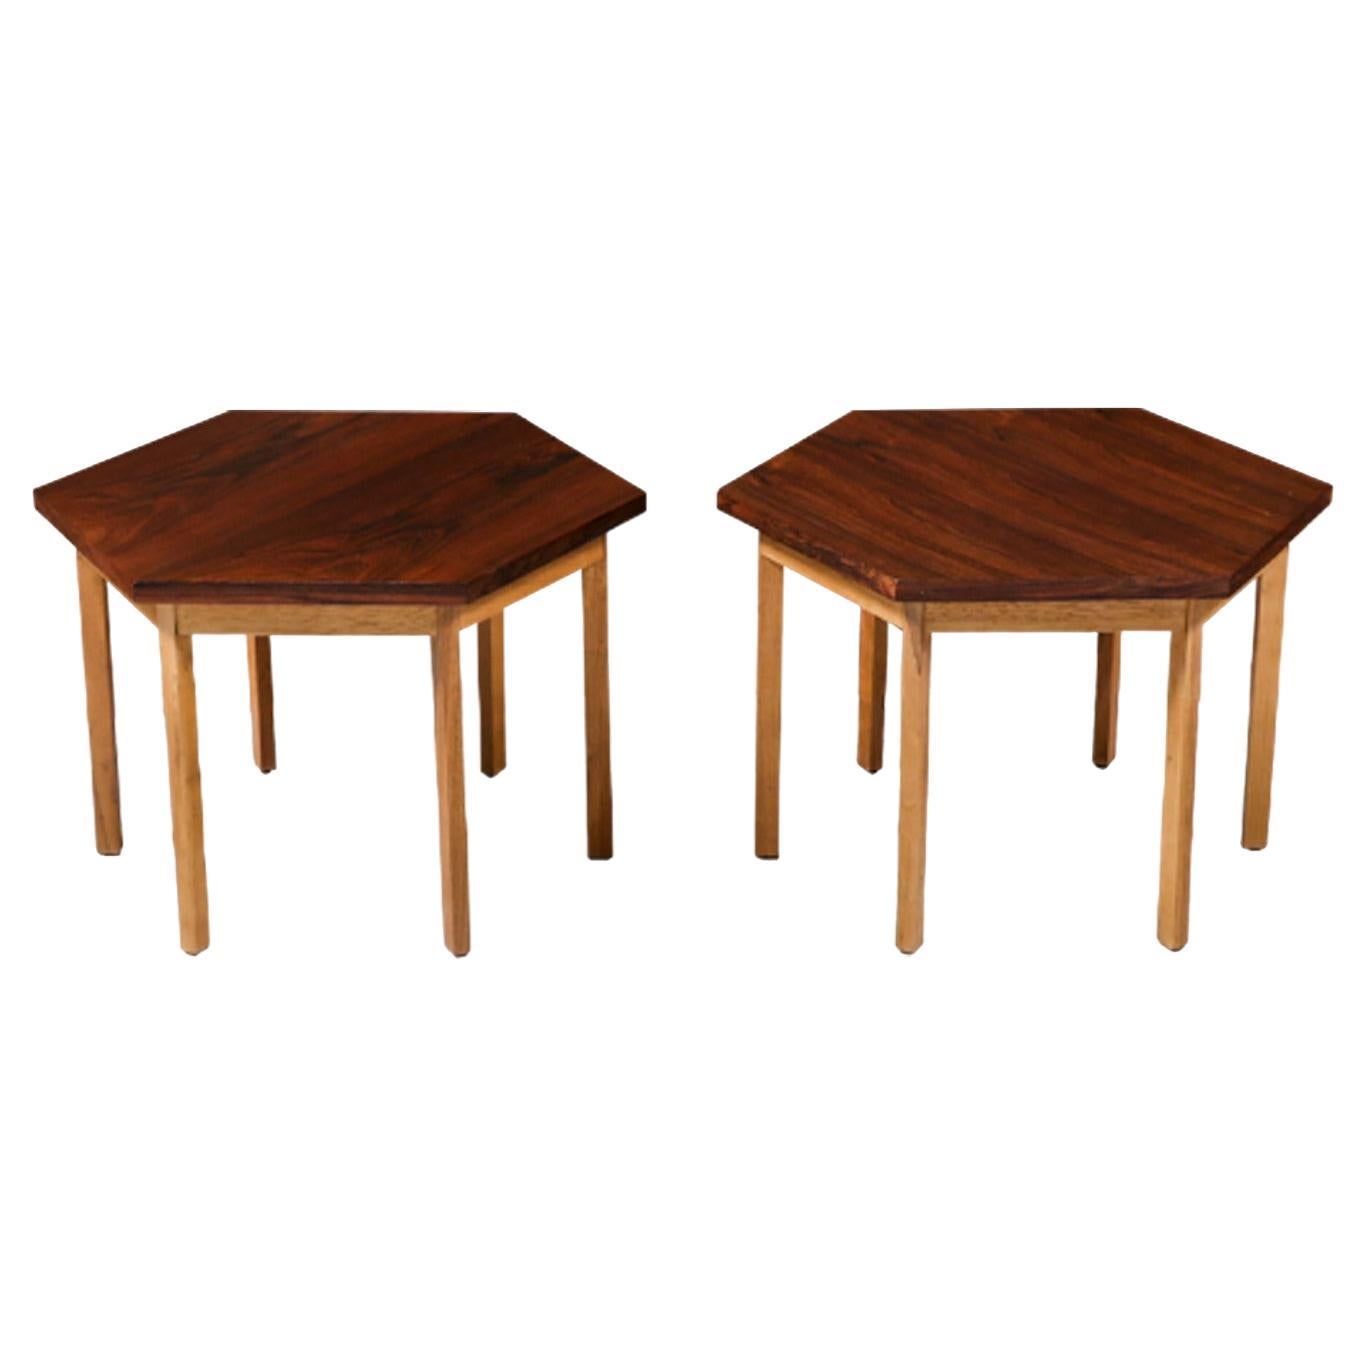 Paul McCobb "Delineator" Hexagonal Rosewood Side Tables for Lane For Sale